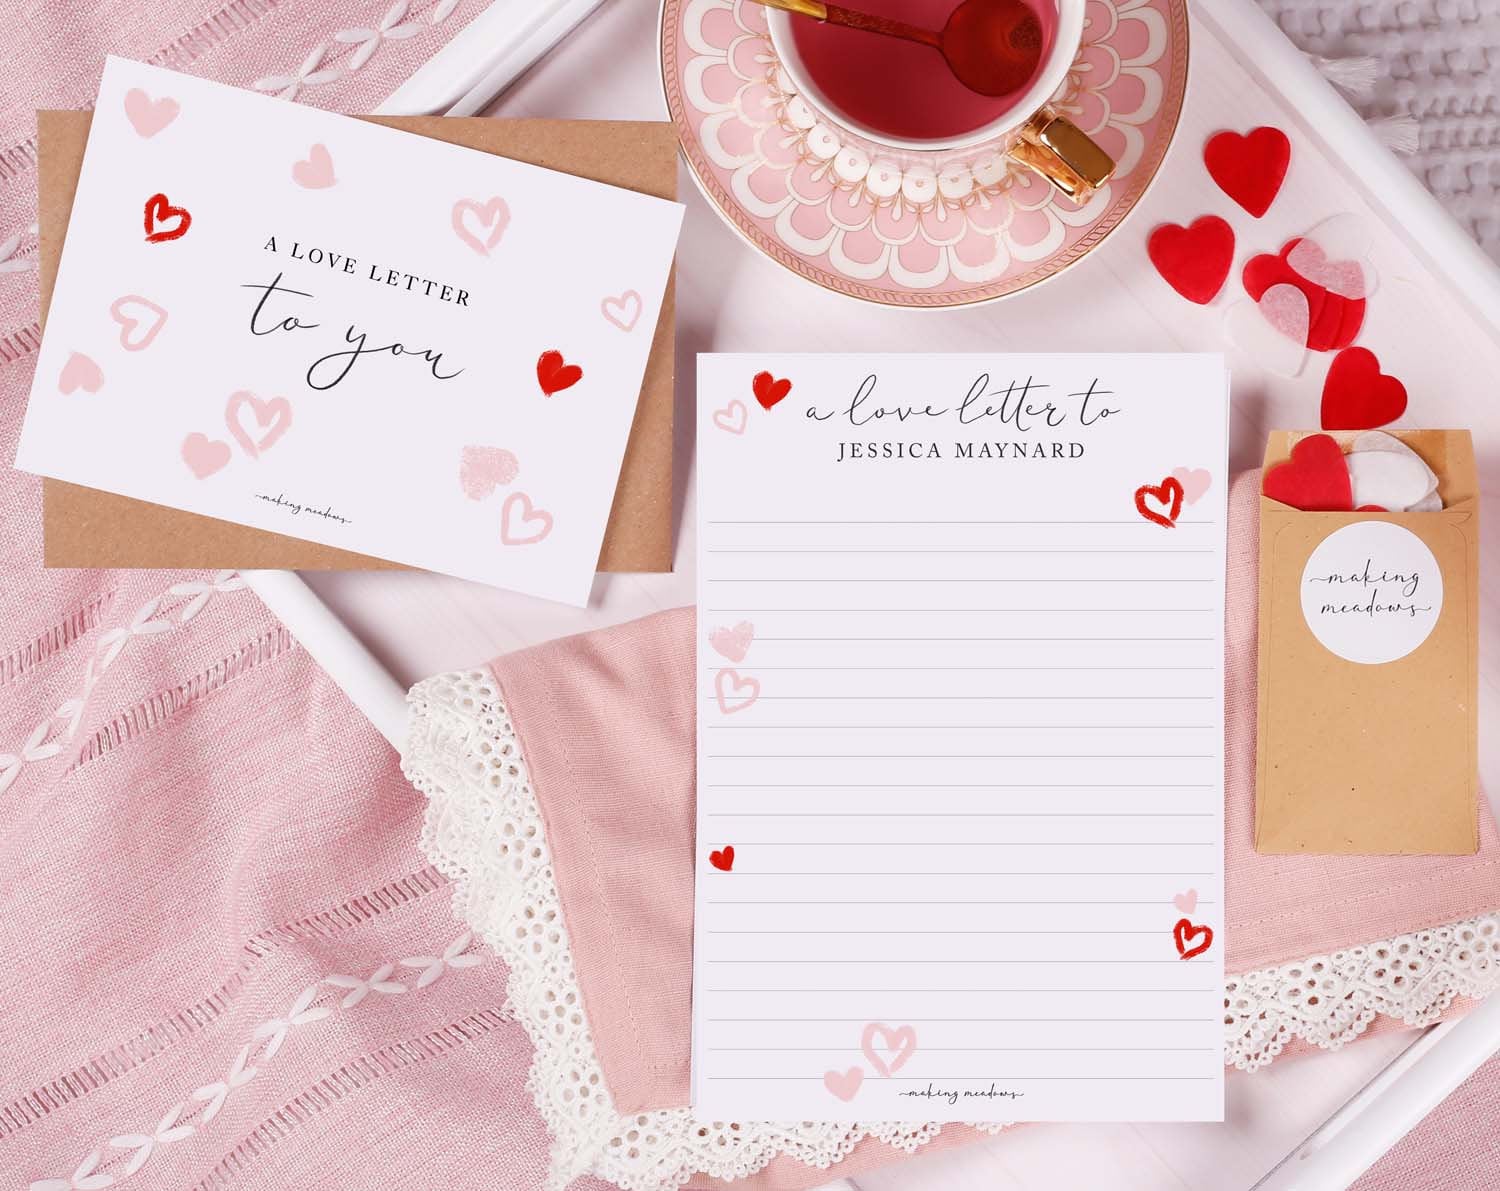 Personalised Love Letter With Heart Confetti